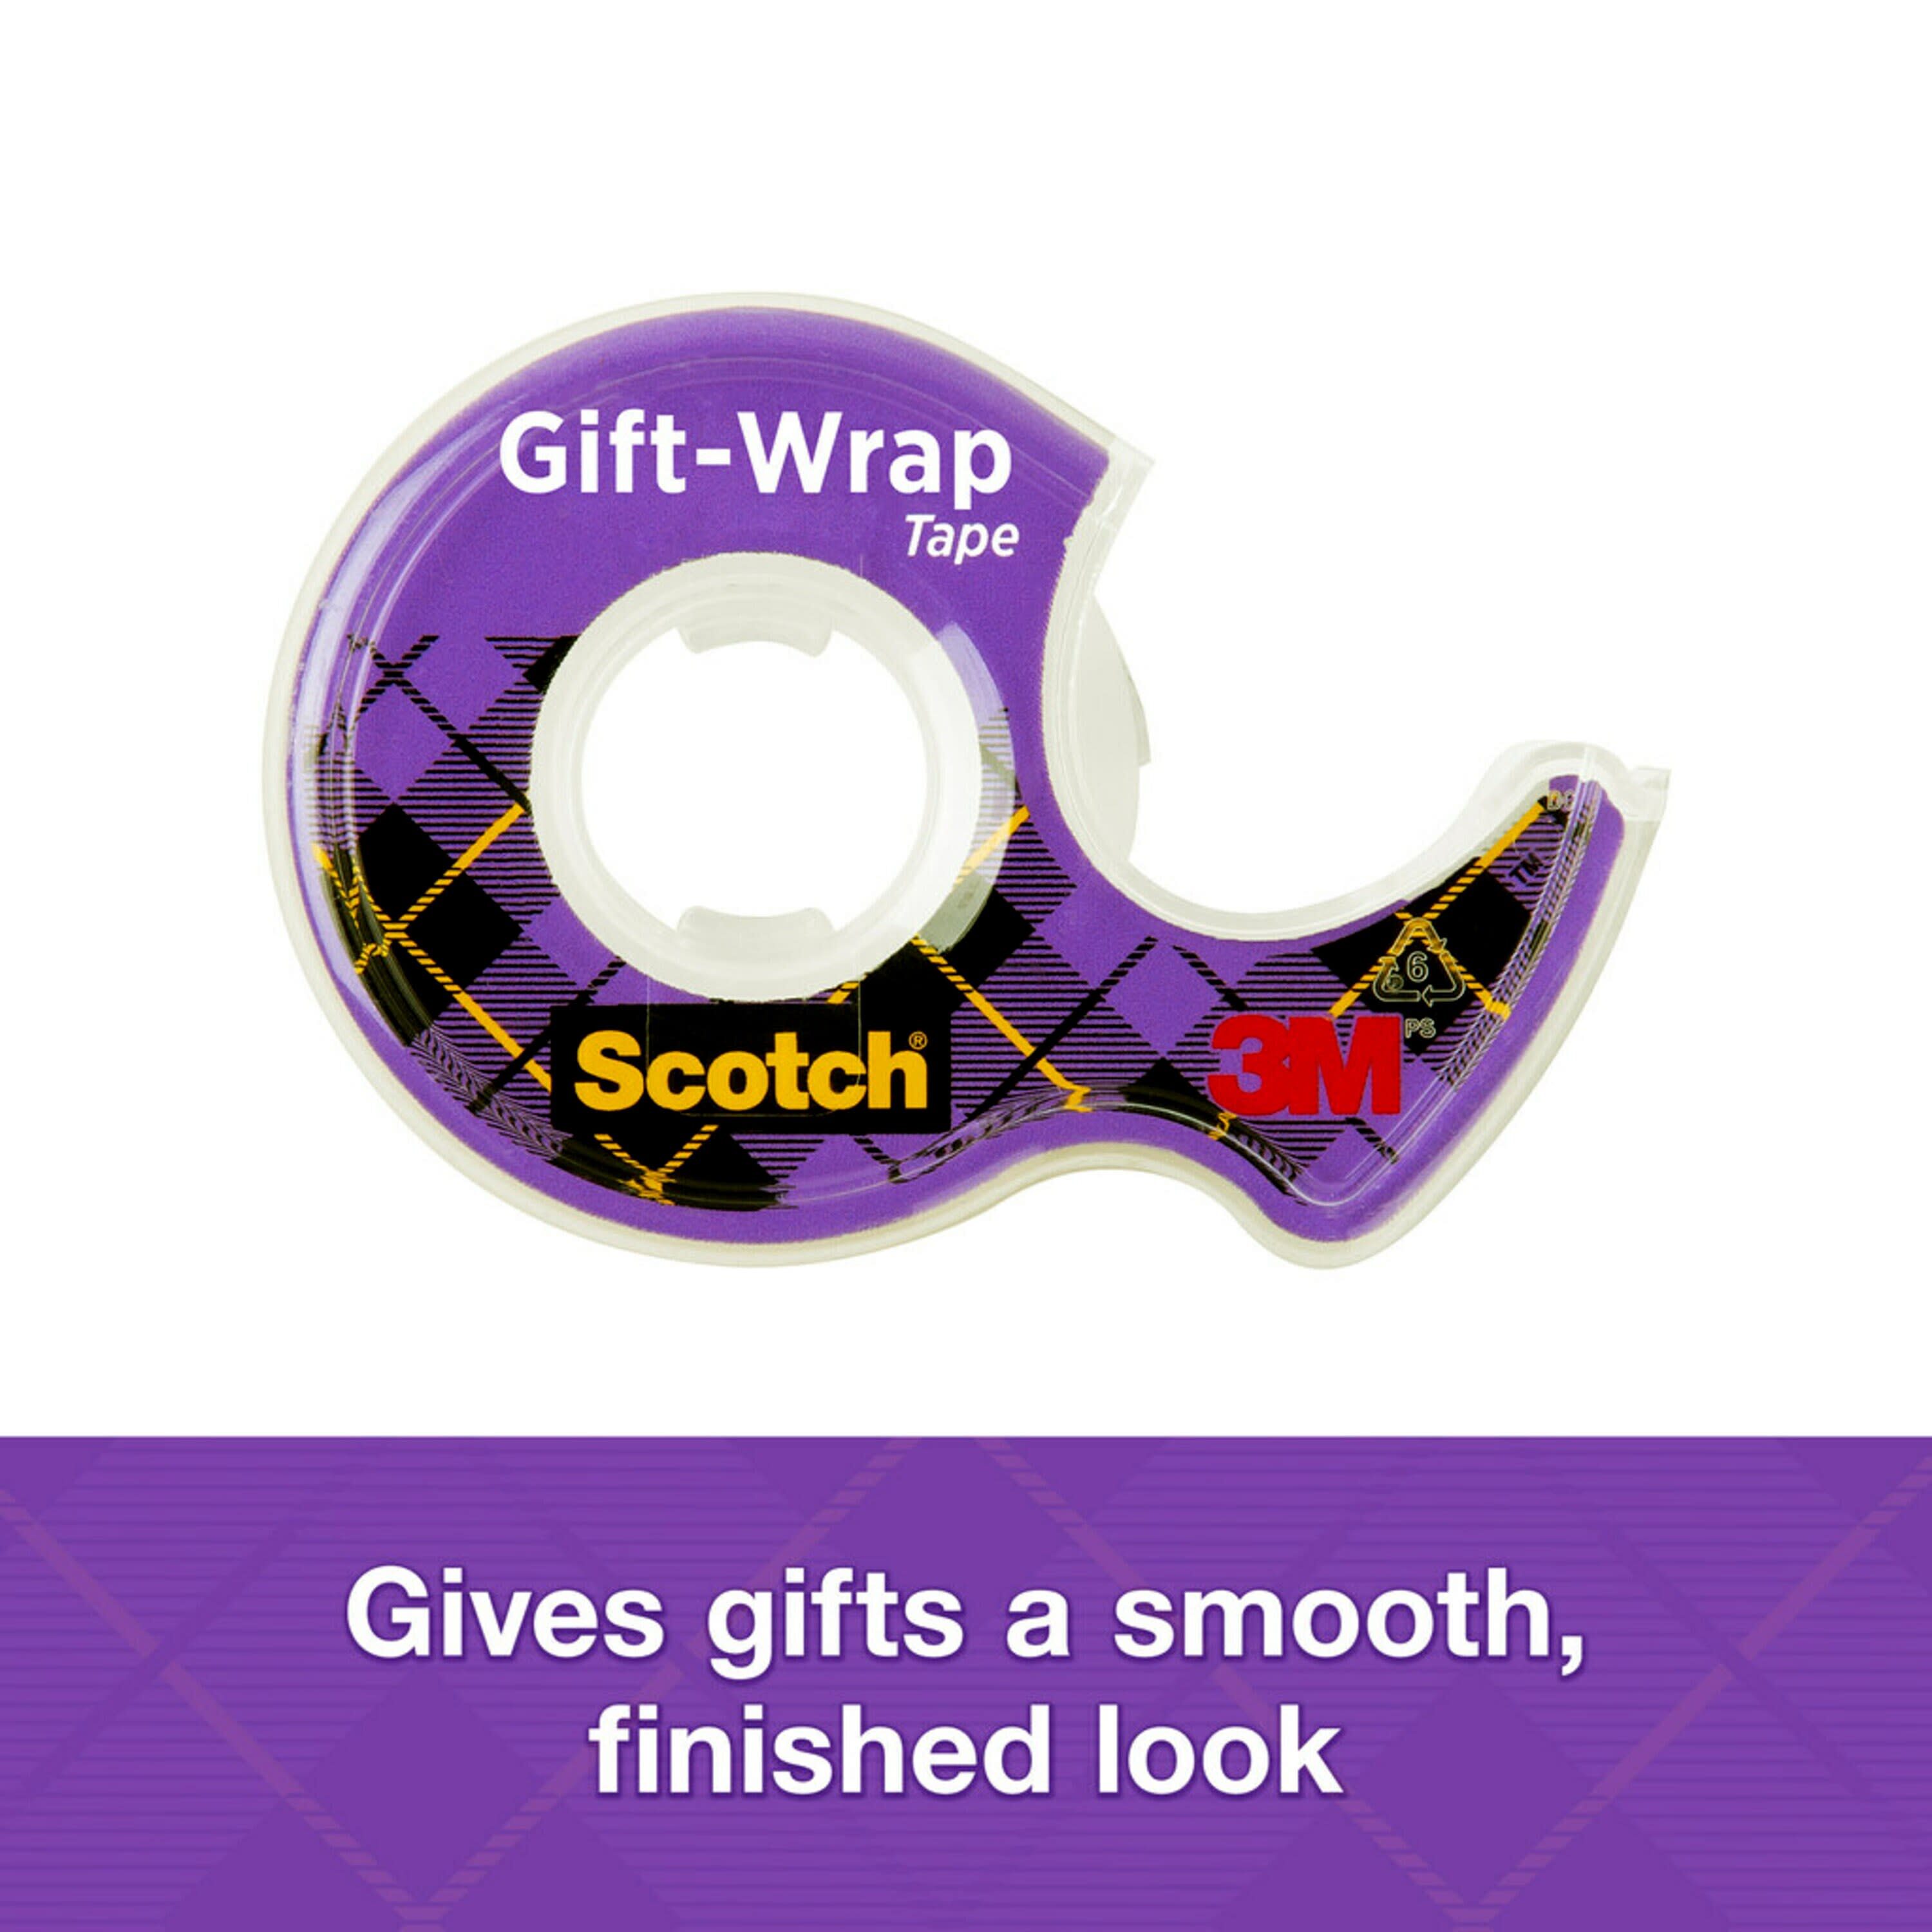  Scotch Gift Wrap Tape, 0.75 x 300 Inches, 6 Pieces